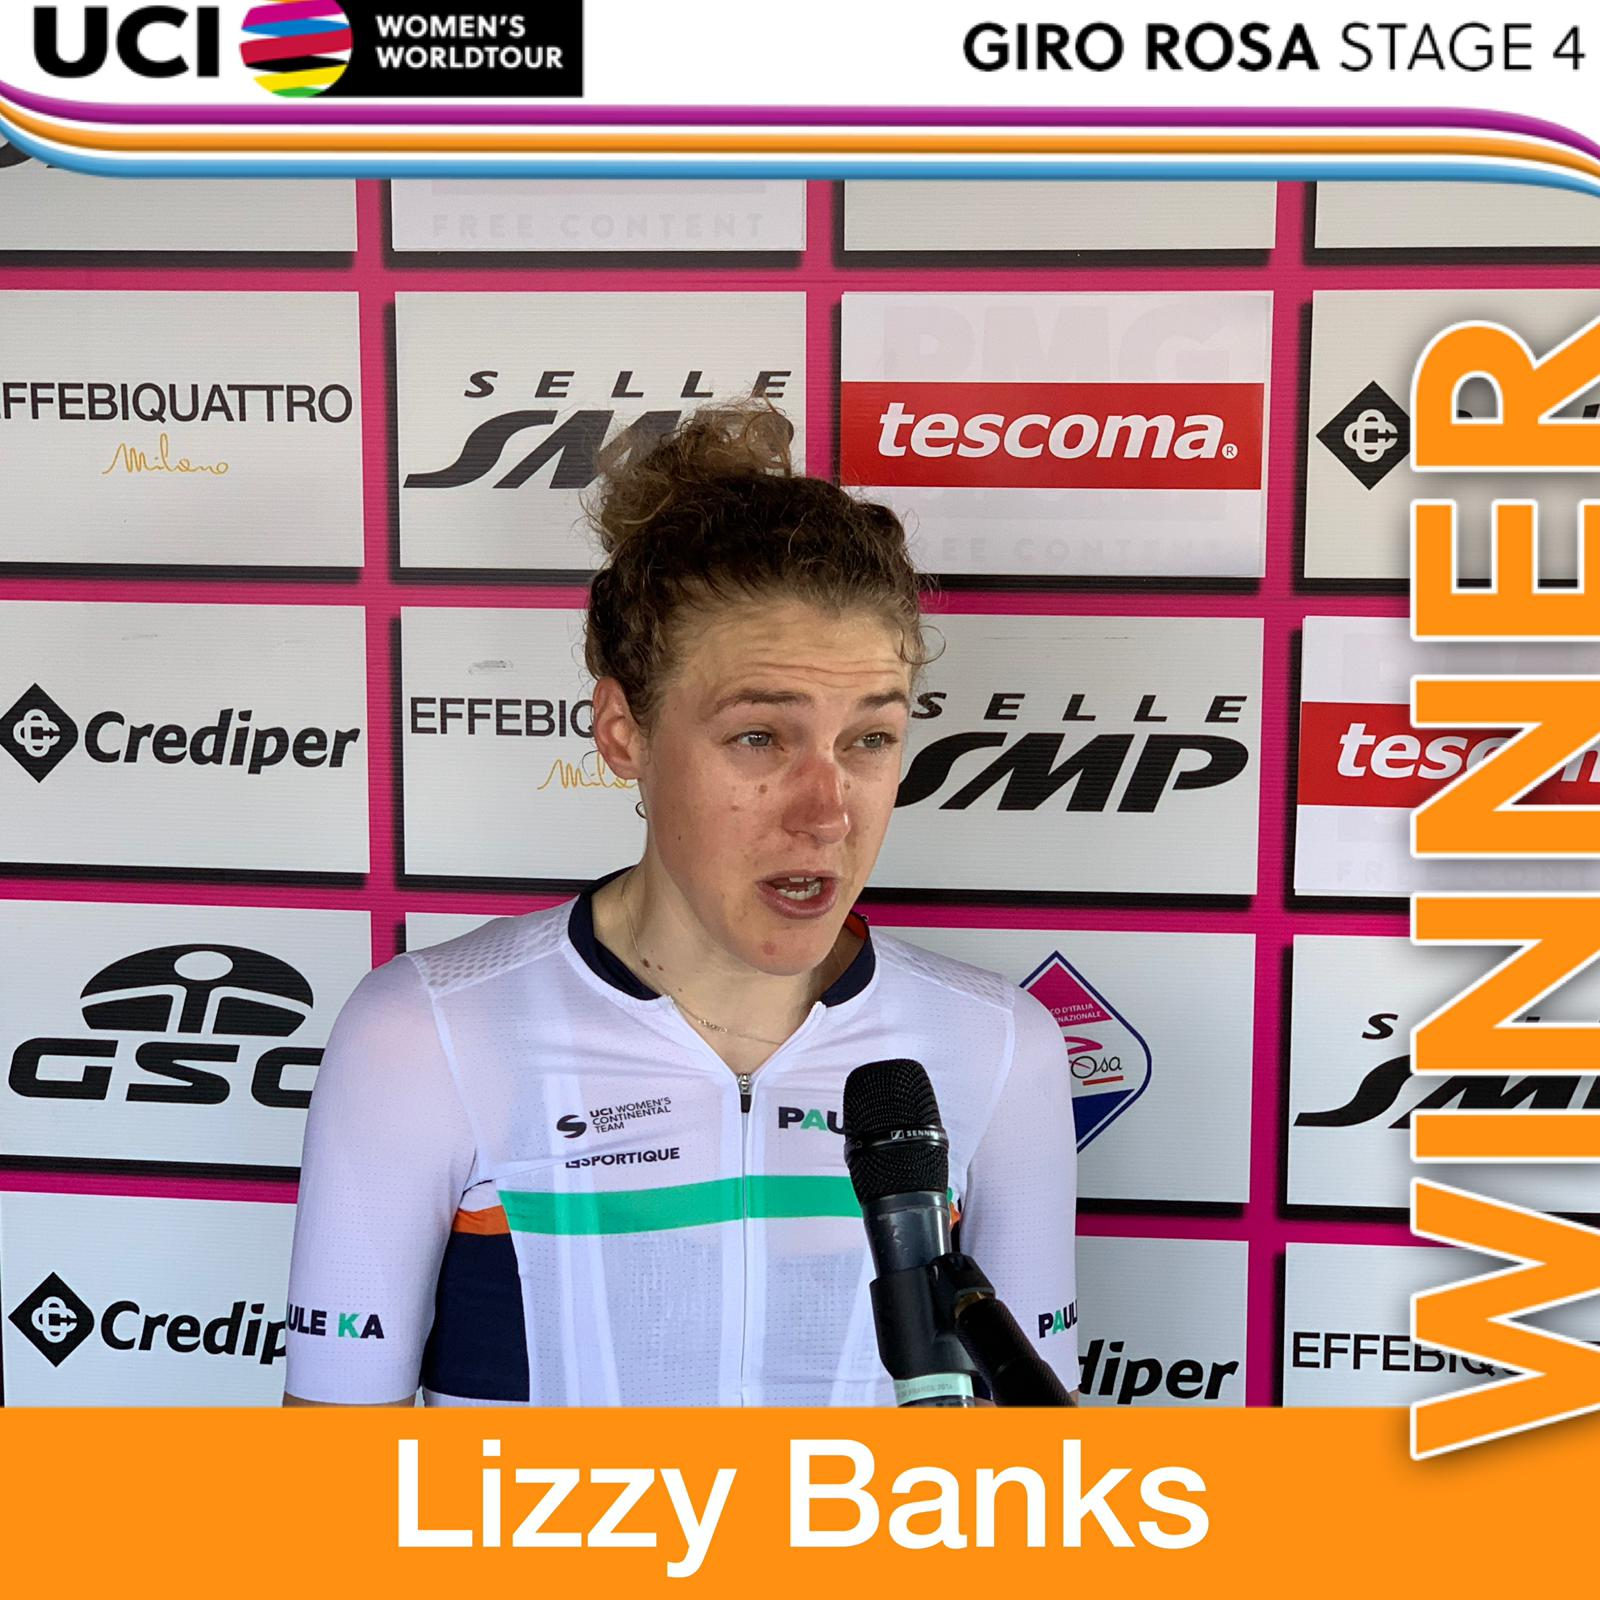 Lizzy Banks won the fourth stage of the Giro Rosa ©UCI WWT